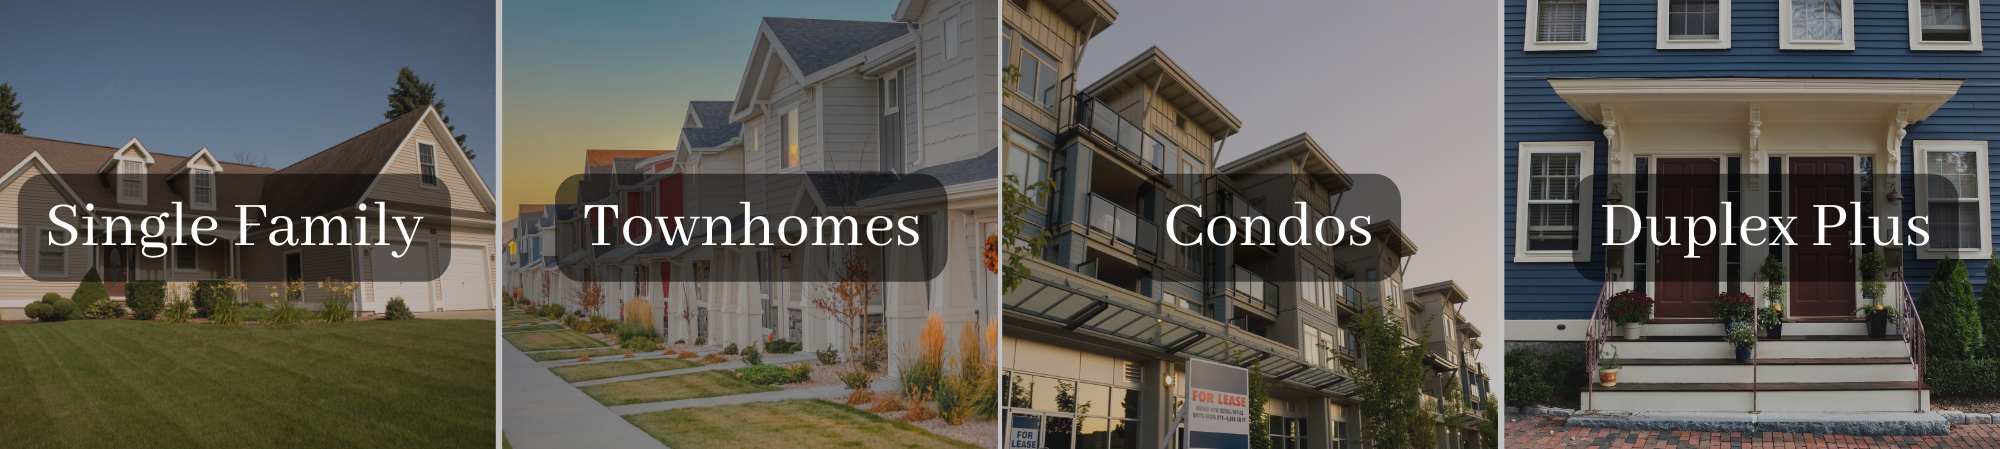 Single Family, Townhomes, Condos, and multifamily properties.